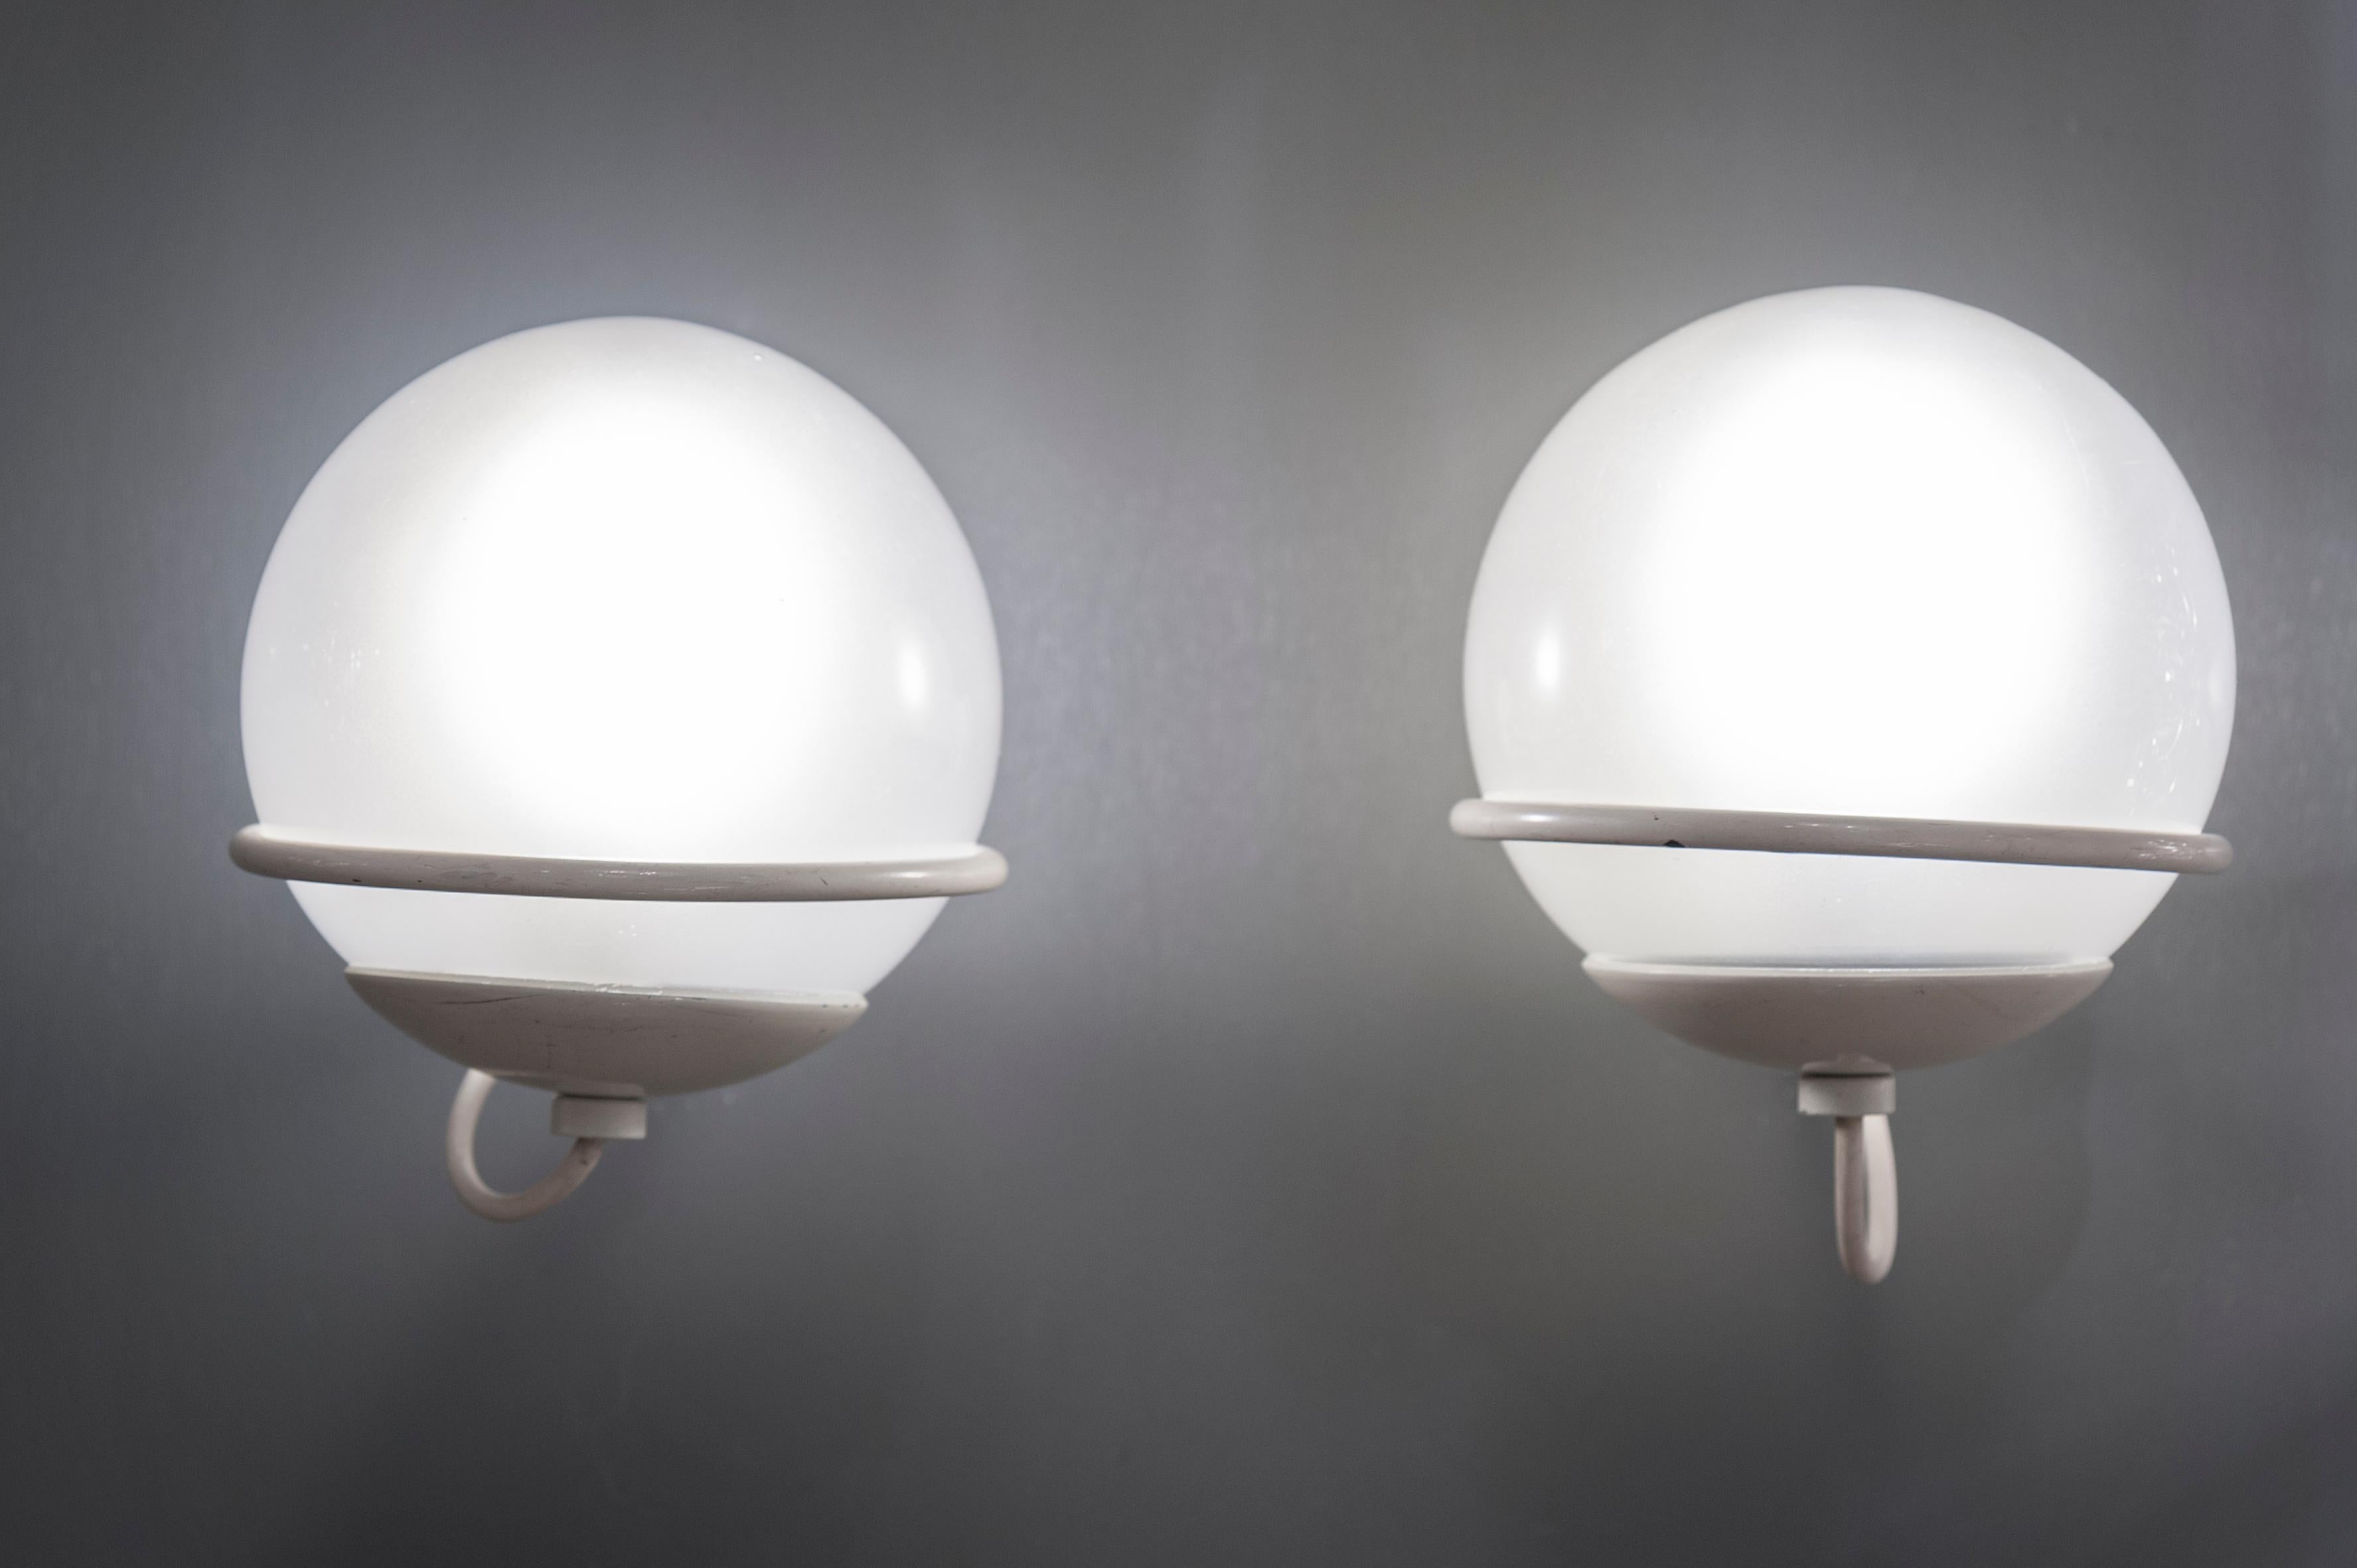 Pair of metal with frosted glass globes wall sconces by Gino Sarfatti for Arteluce, model 371/1, circa 1963.